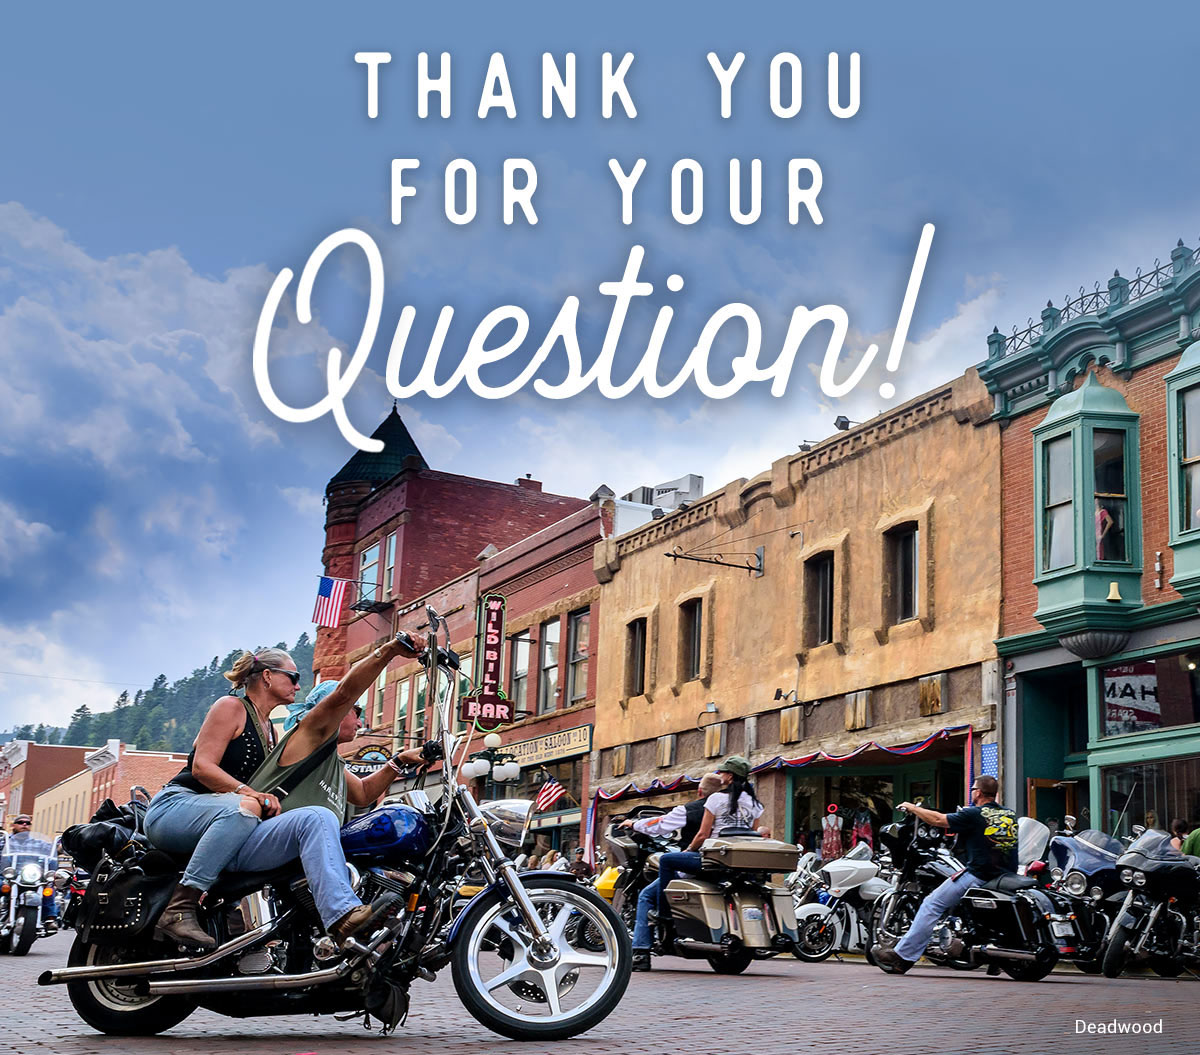 South Dakota - Thank You for Your Question!